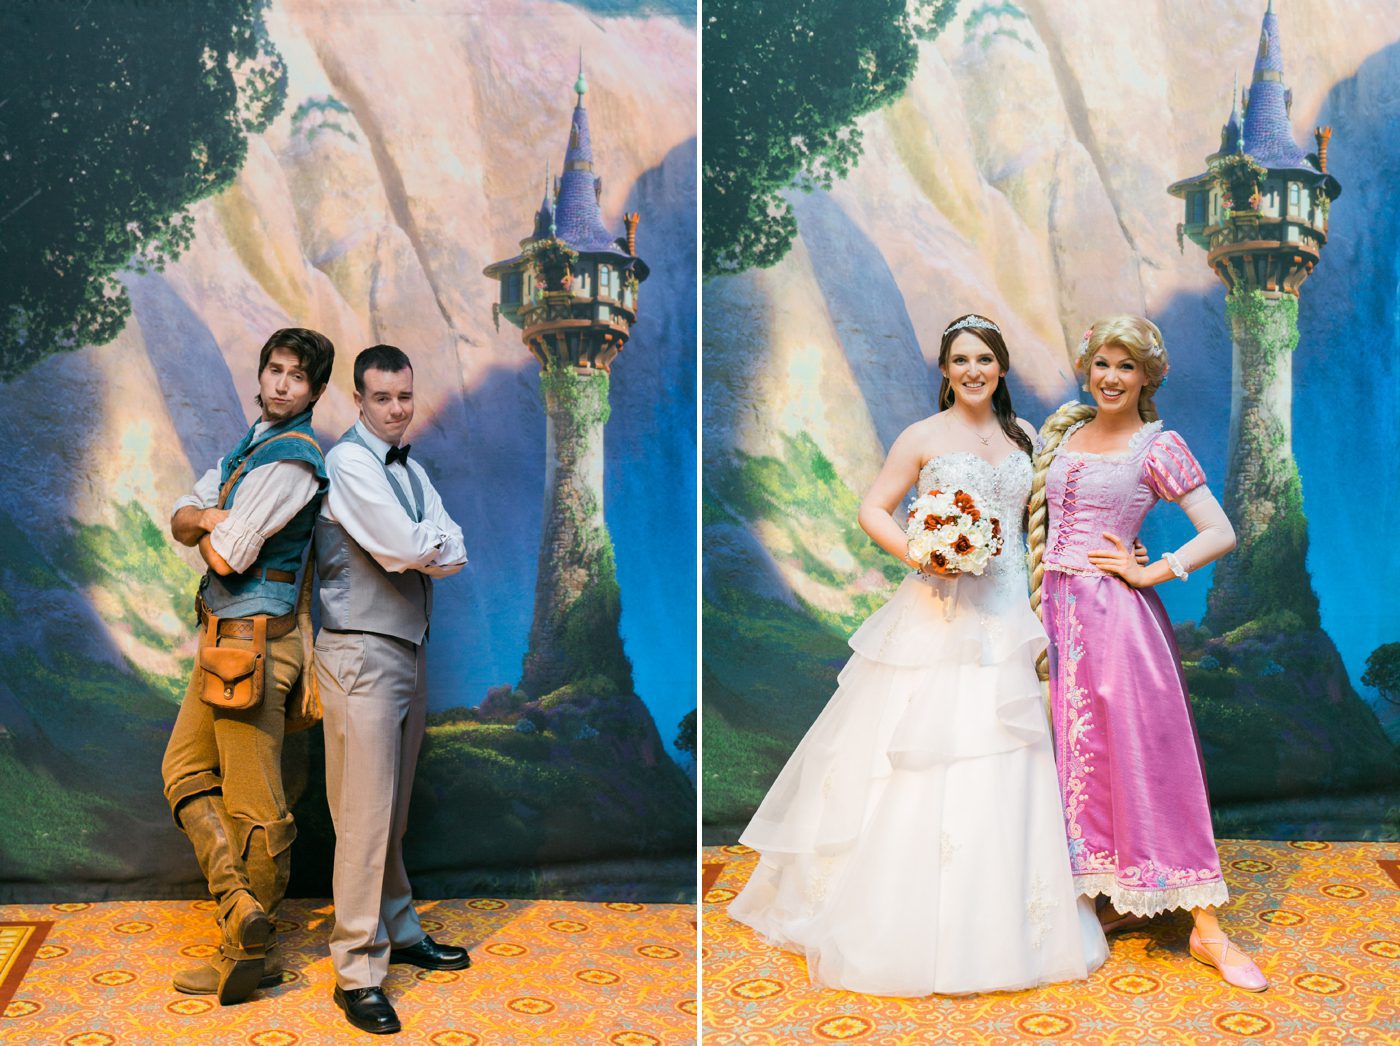 tangled inspired wedding at Disney World by Catherine Ann Photography